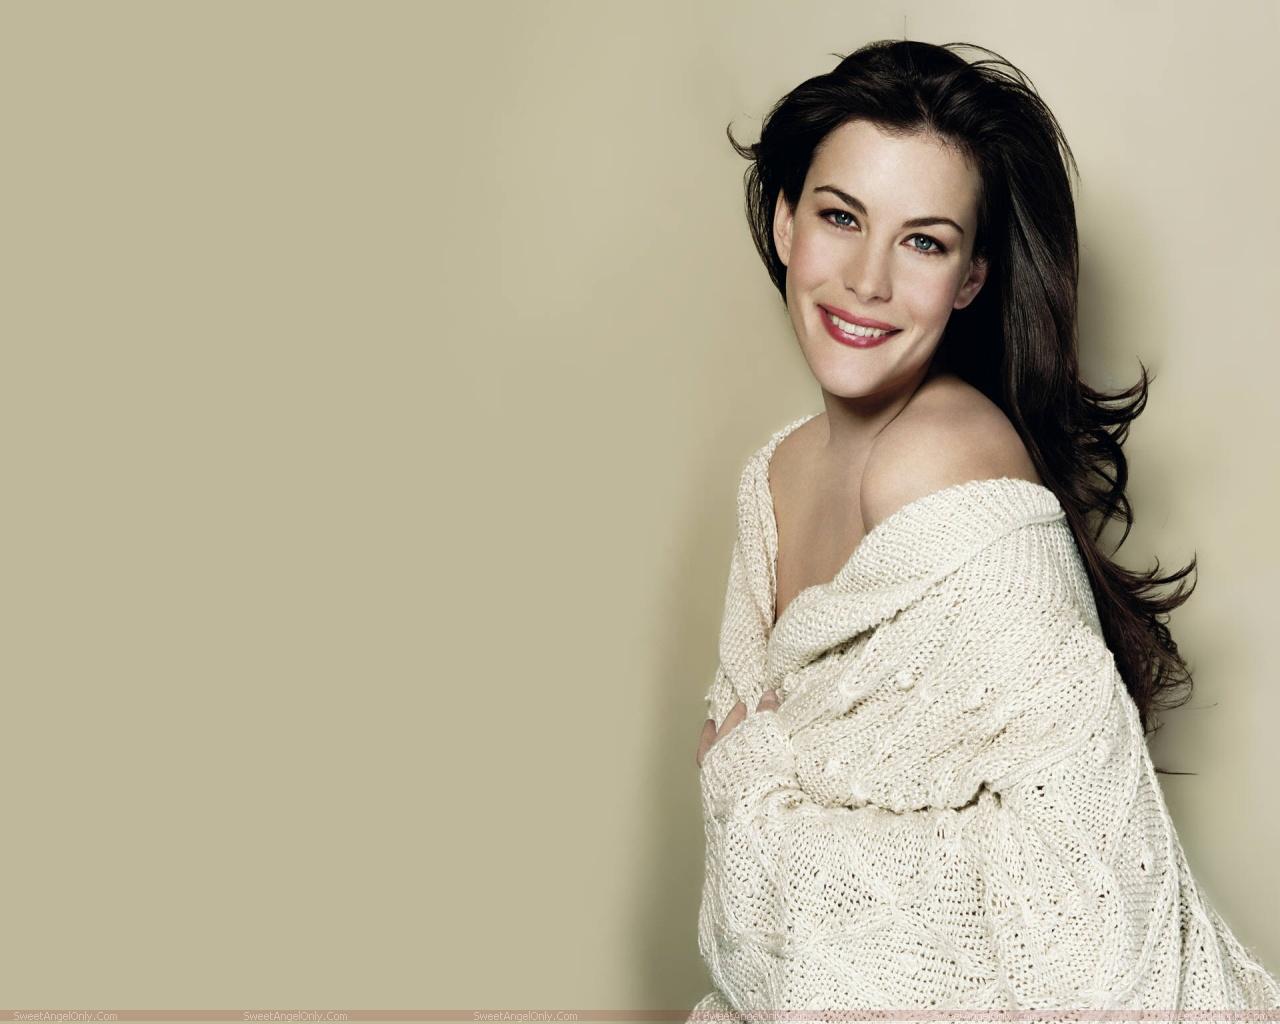 Liv Tyler Profile And Beautiful Latest Hot Wallpaper | Hollywood Stars Hd Wallpapers